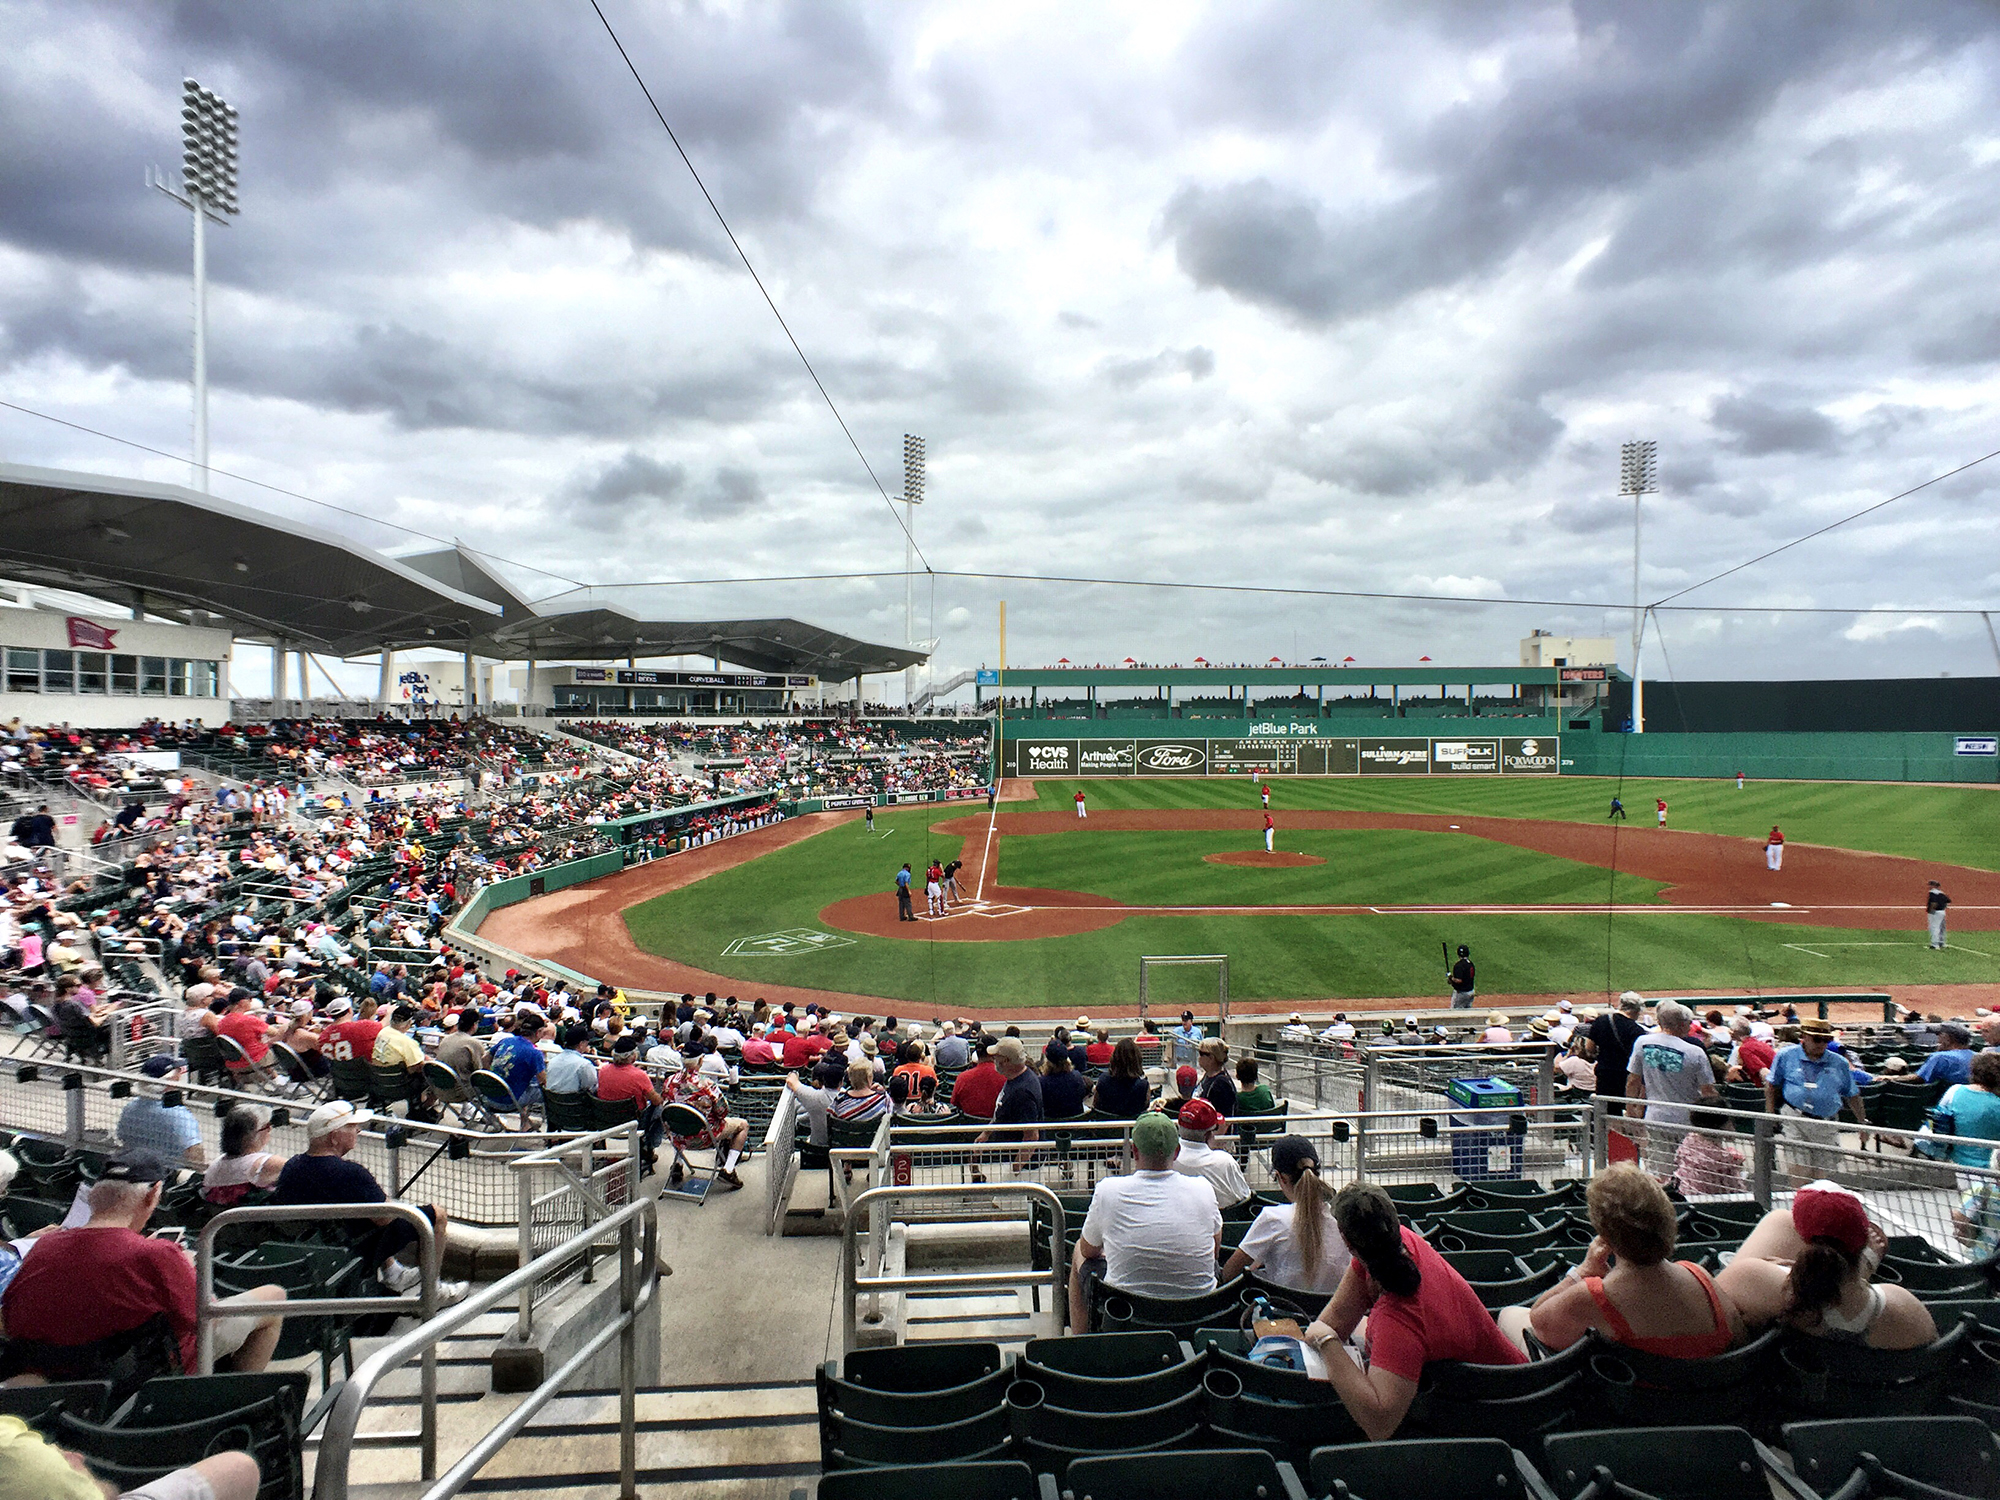 The Red Sox Winter Home: Jet Blue Park